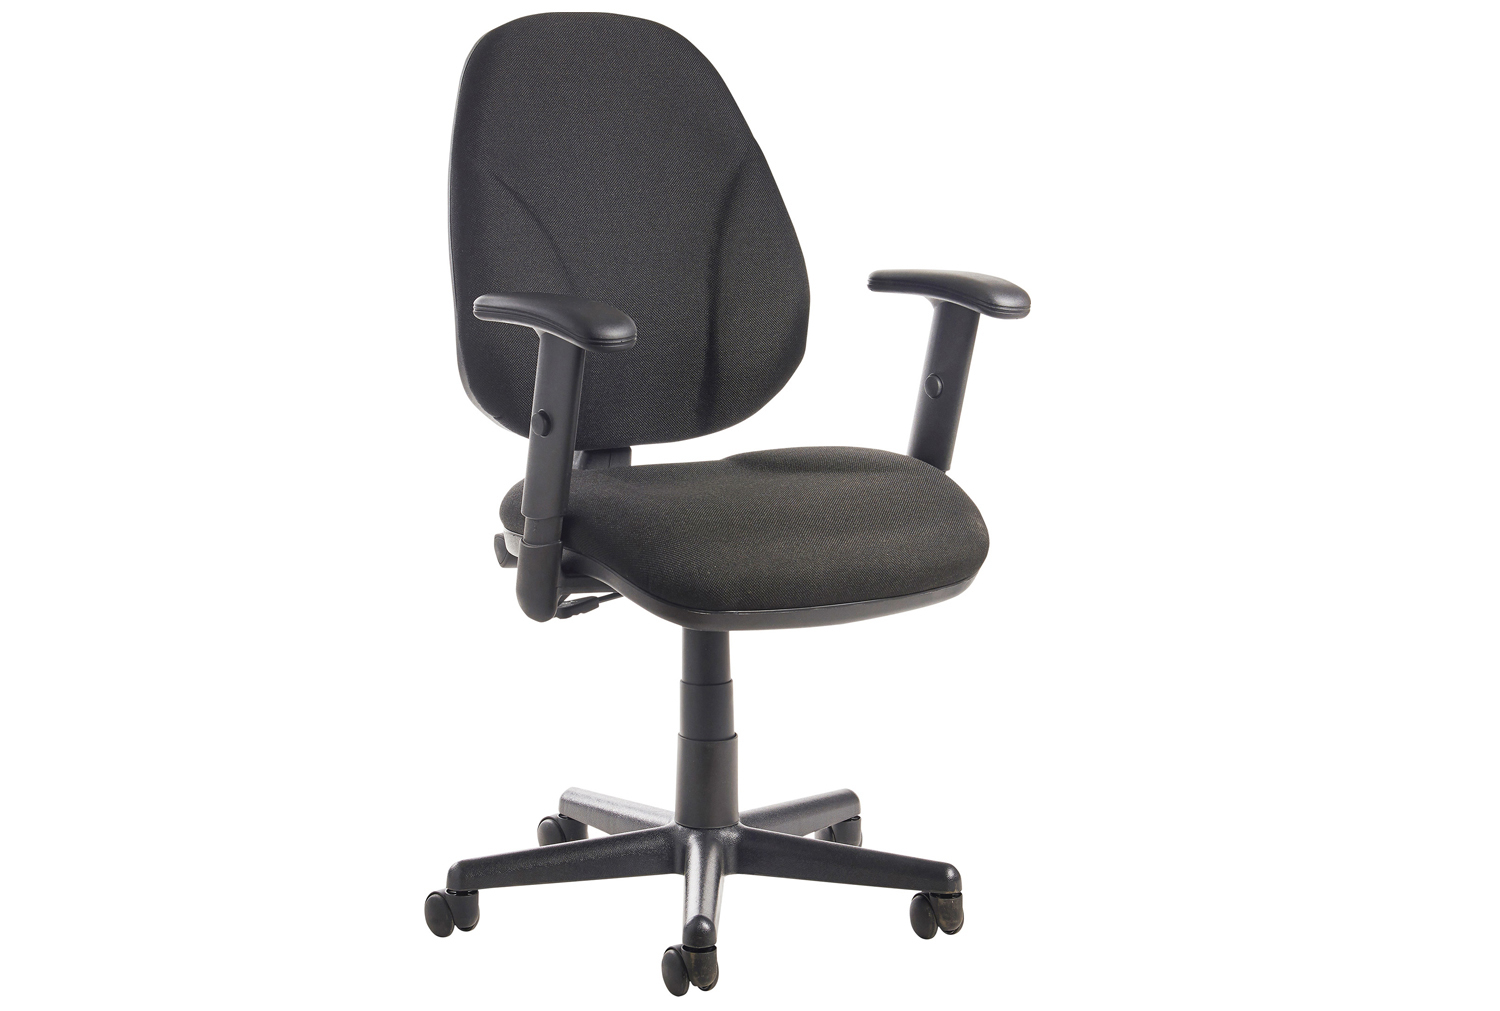 Full Lumbar 1 Lever Operator Office Chair With Adjustable Arms, Black, Express Delivery